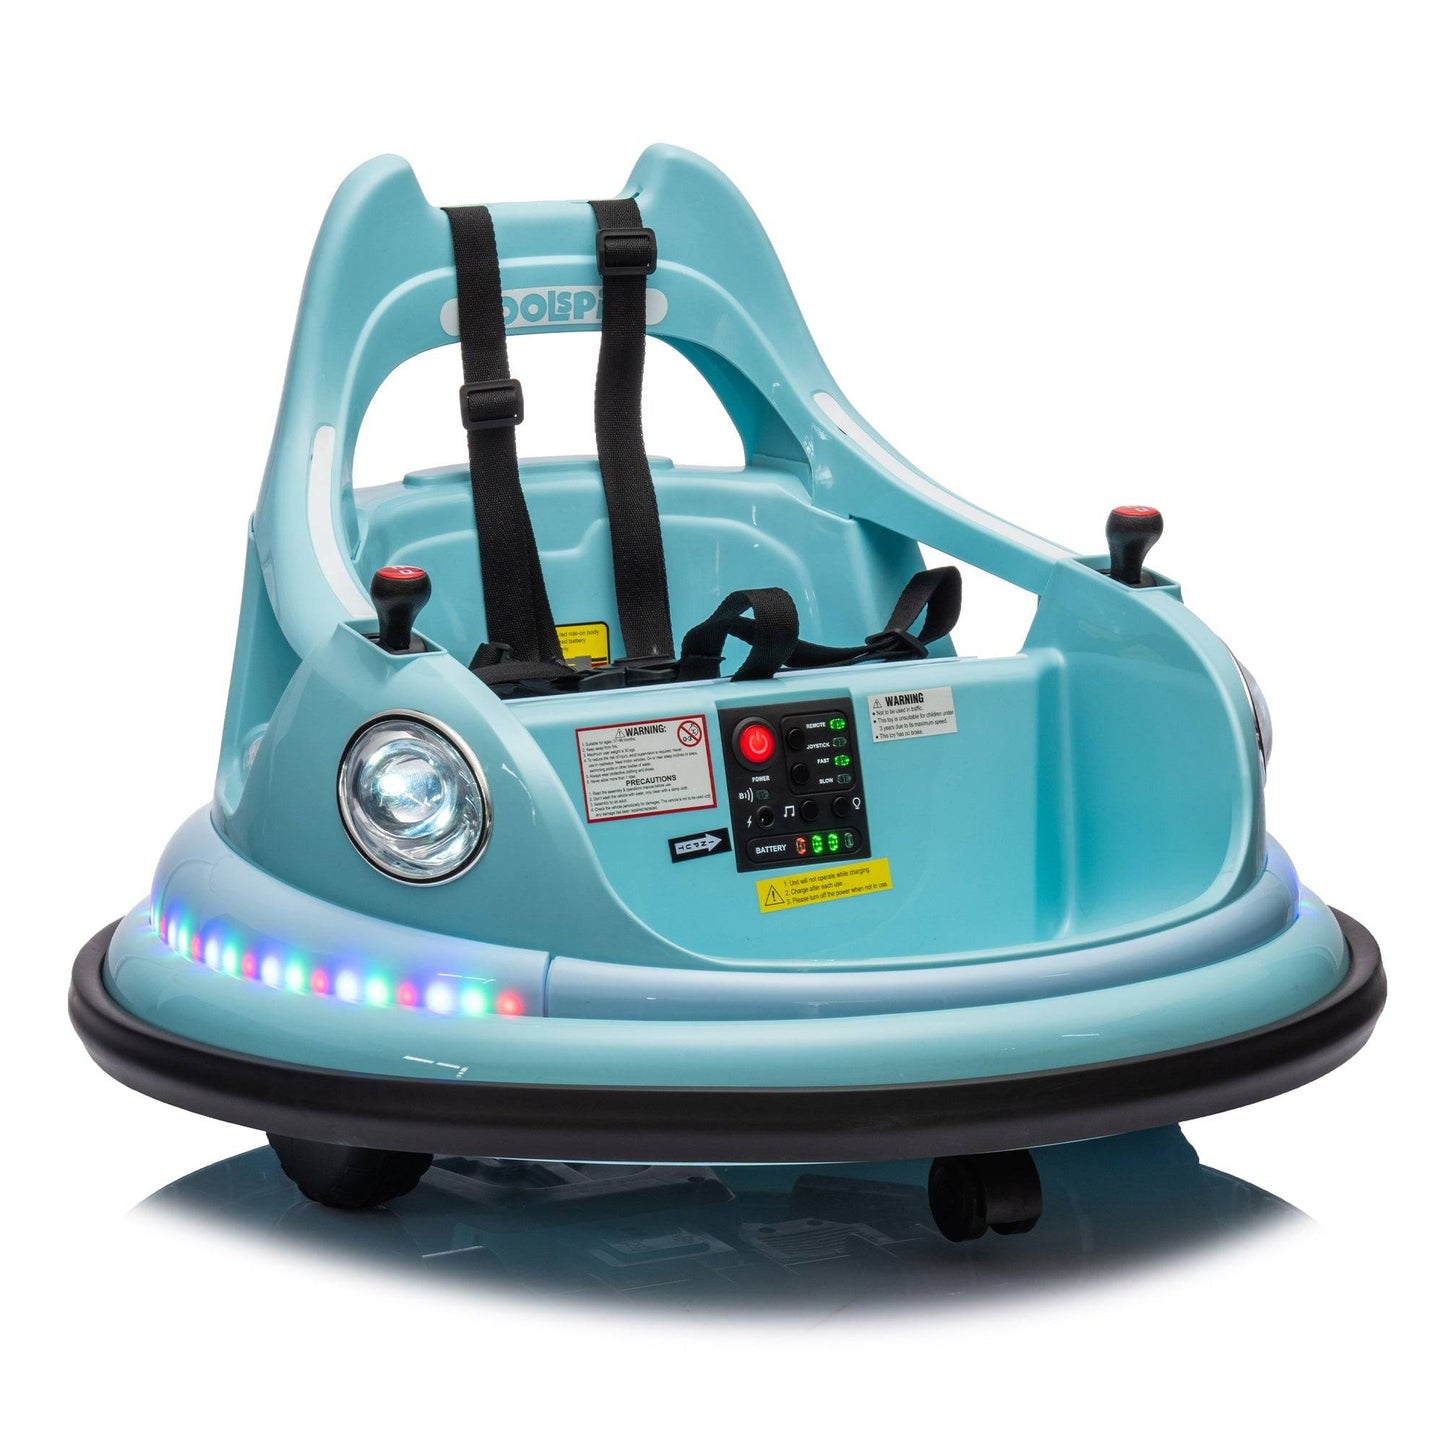 12V ride-on bumper car for kids, electric car for kids,1.5-5 Years Old, W/Remote Control, LED Lights,